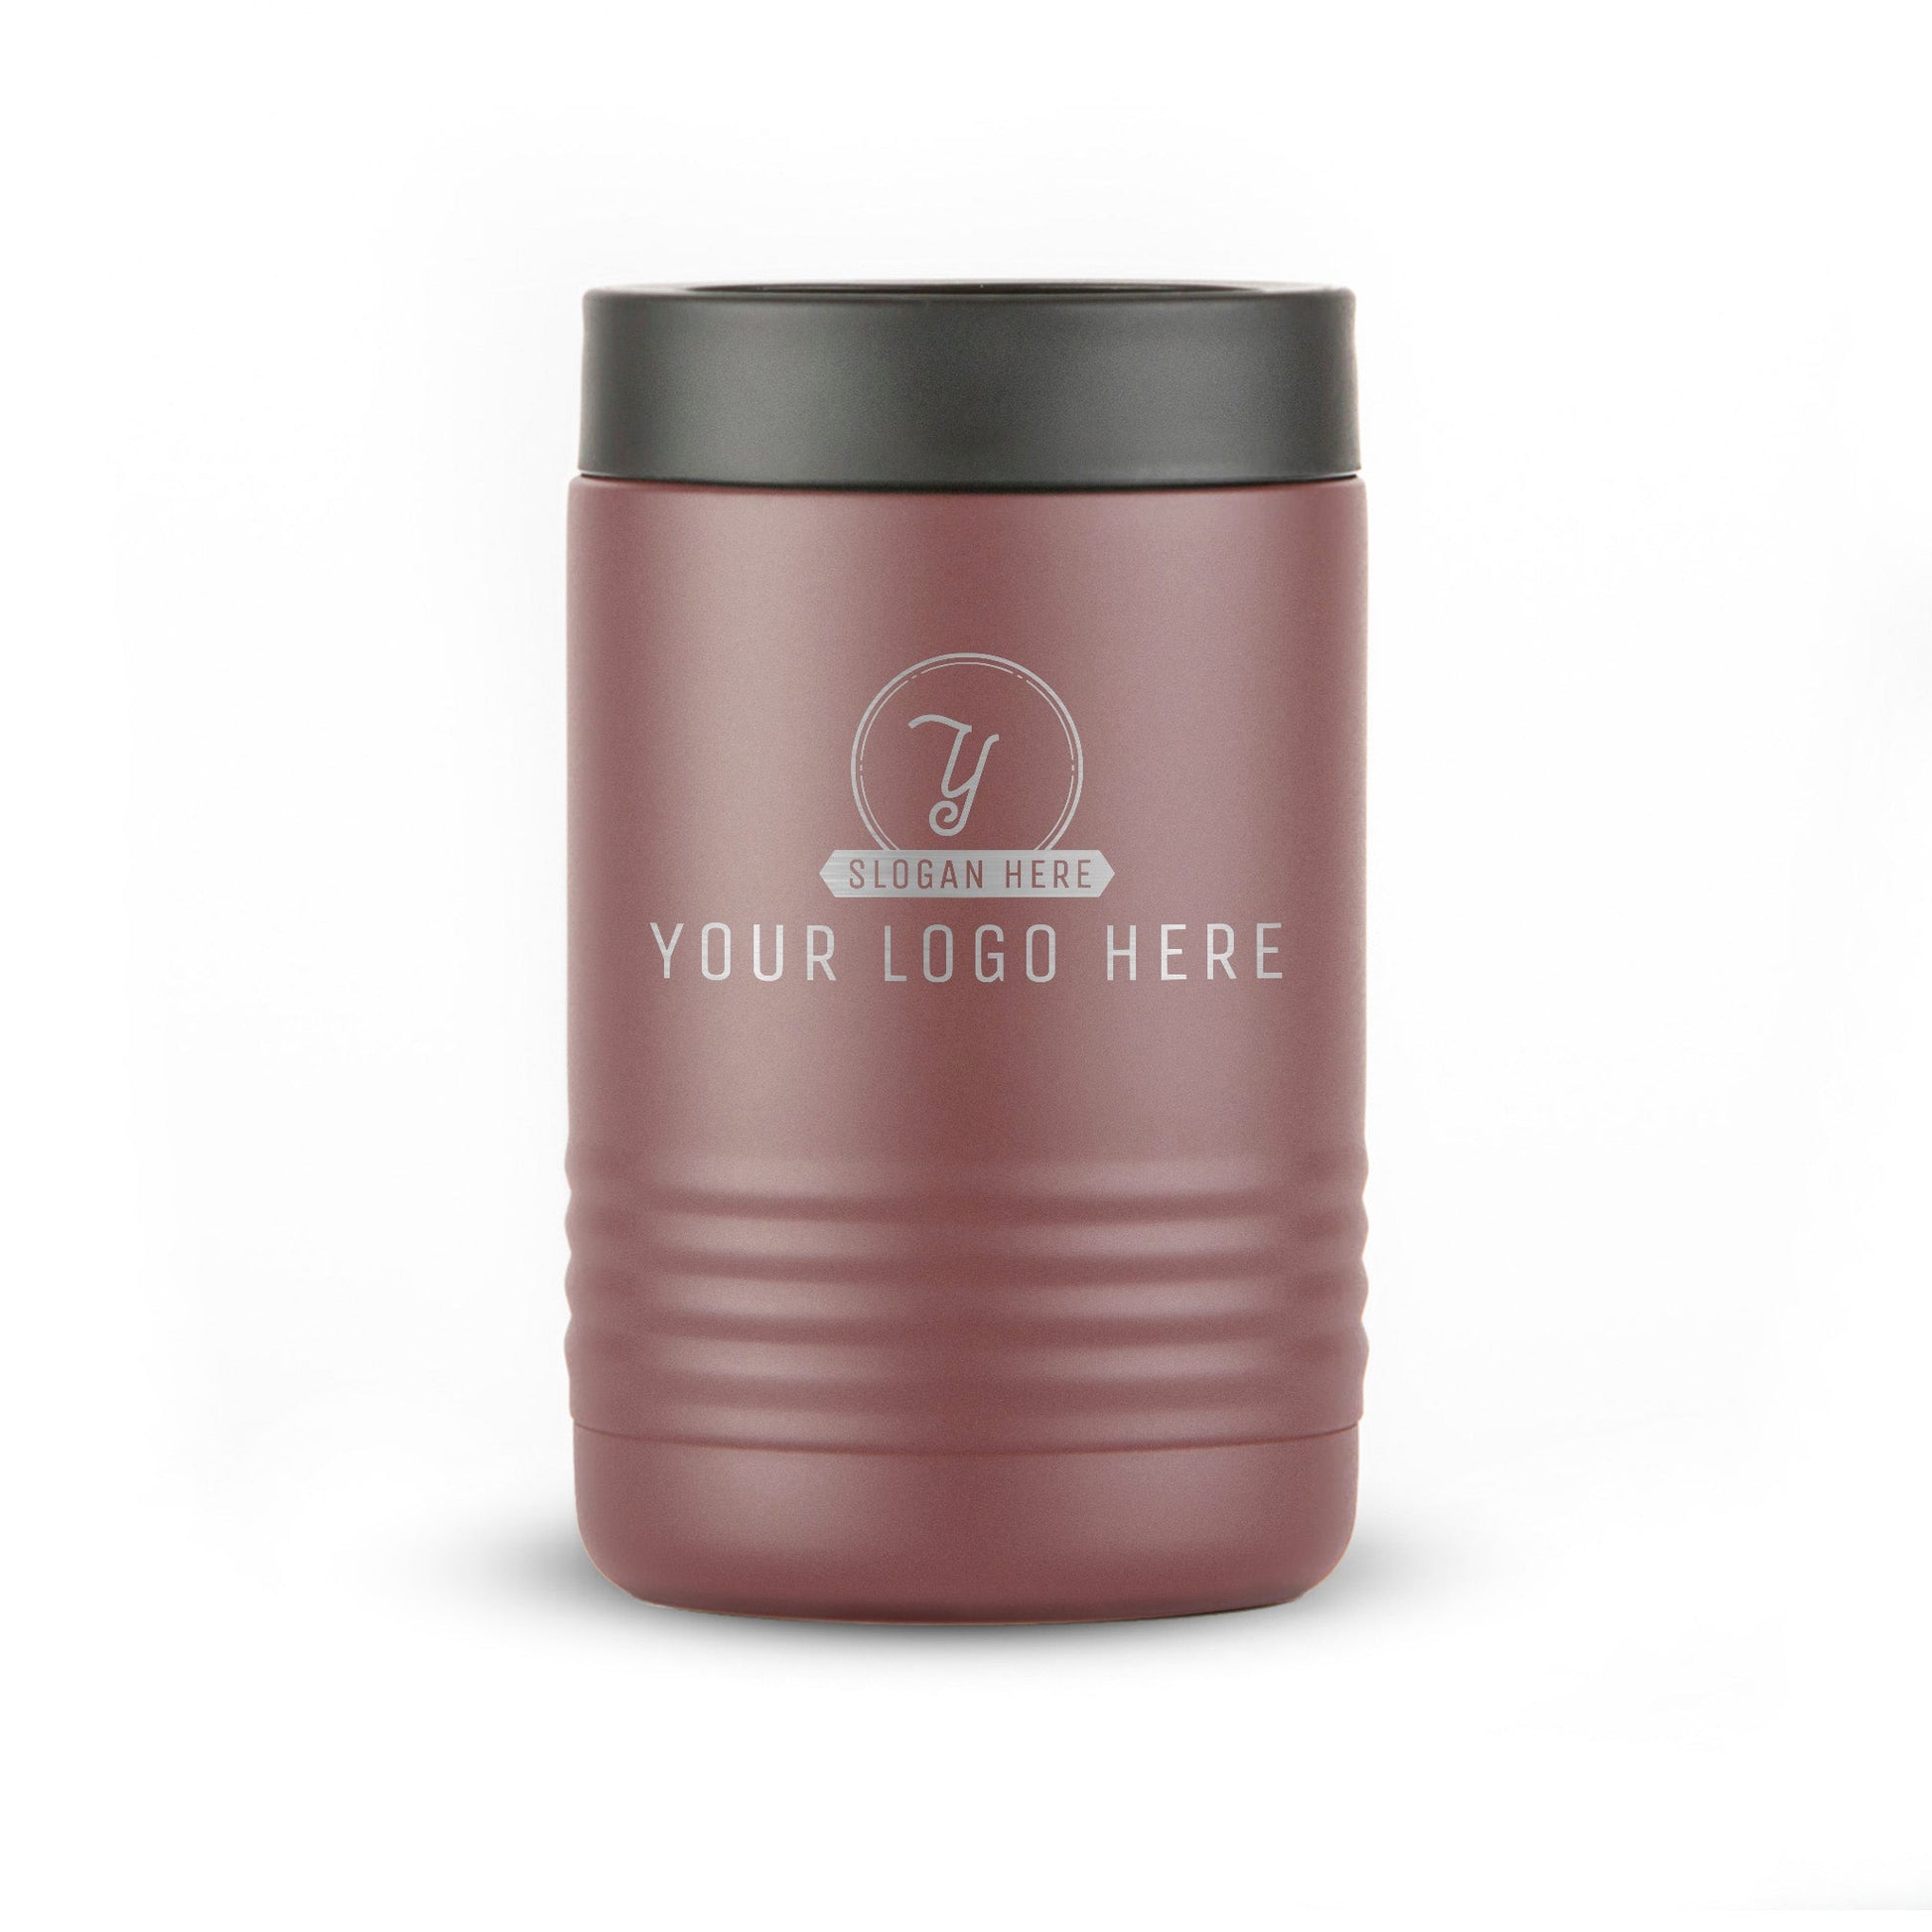 Wholesale Customized 12oz Insulated Beverage Holder - Etchified-Etchified-WH_LBH33